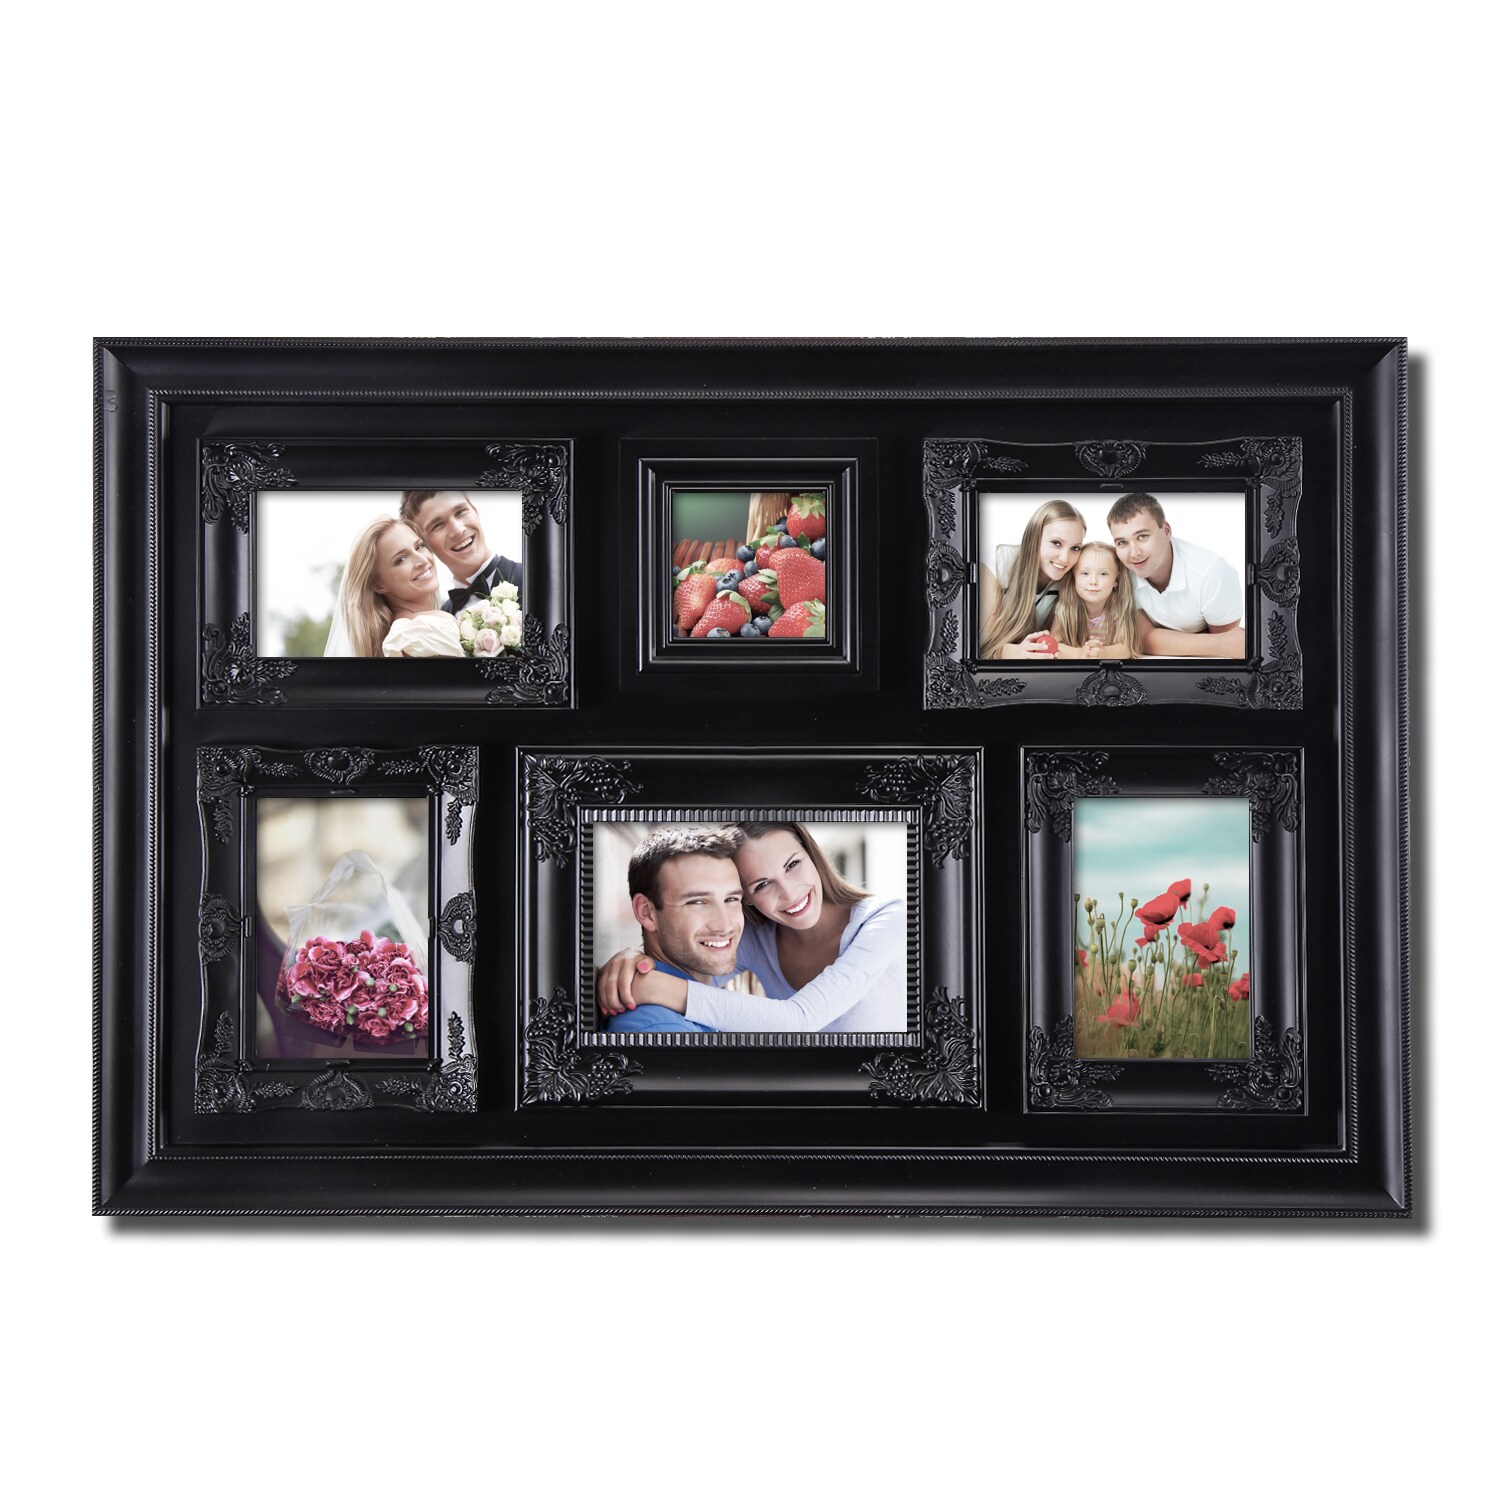 https://ak1.ostkcdn.com/images/products/9067630/Adeco-6-opening-Luxurious-Black-Photo-Collage-Frame-906d68d3-6541-473c-93e2-74bd5768c548.jpg